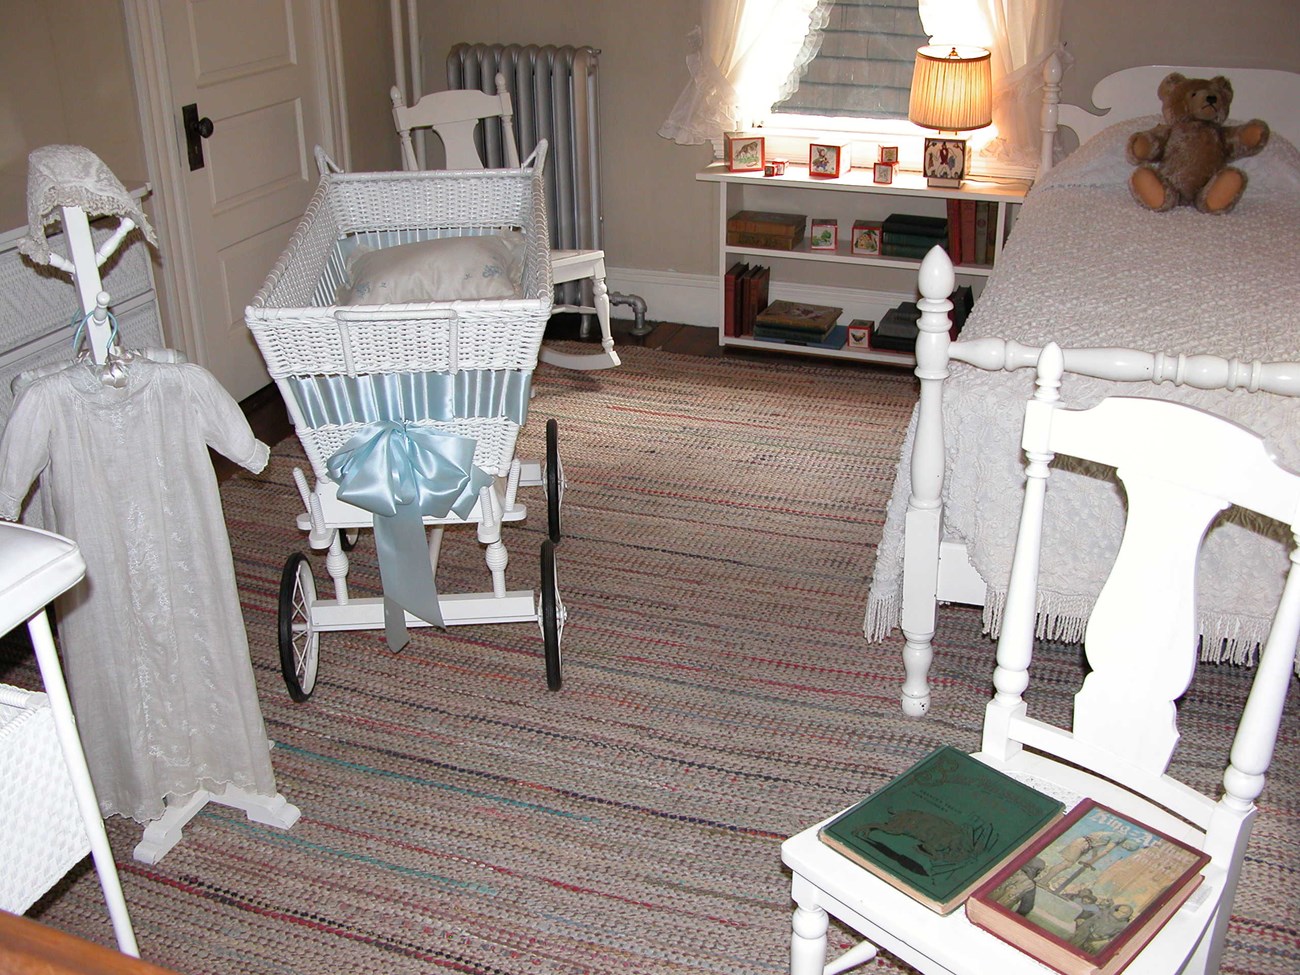 A photo of a nursery with white furniture: a clothes rack with a white gown and cap, a wheeled crib, rocking chair, a nightstand holding toy blocks, books, and a lamp, a bed with a teddy bear on it, and two books on a chair.